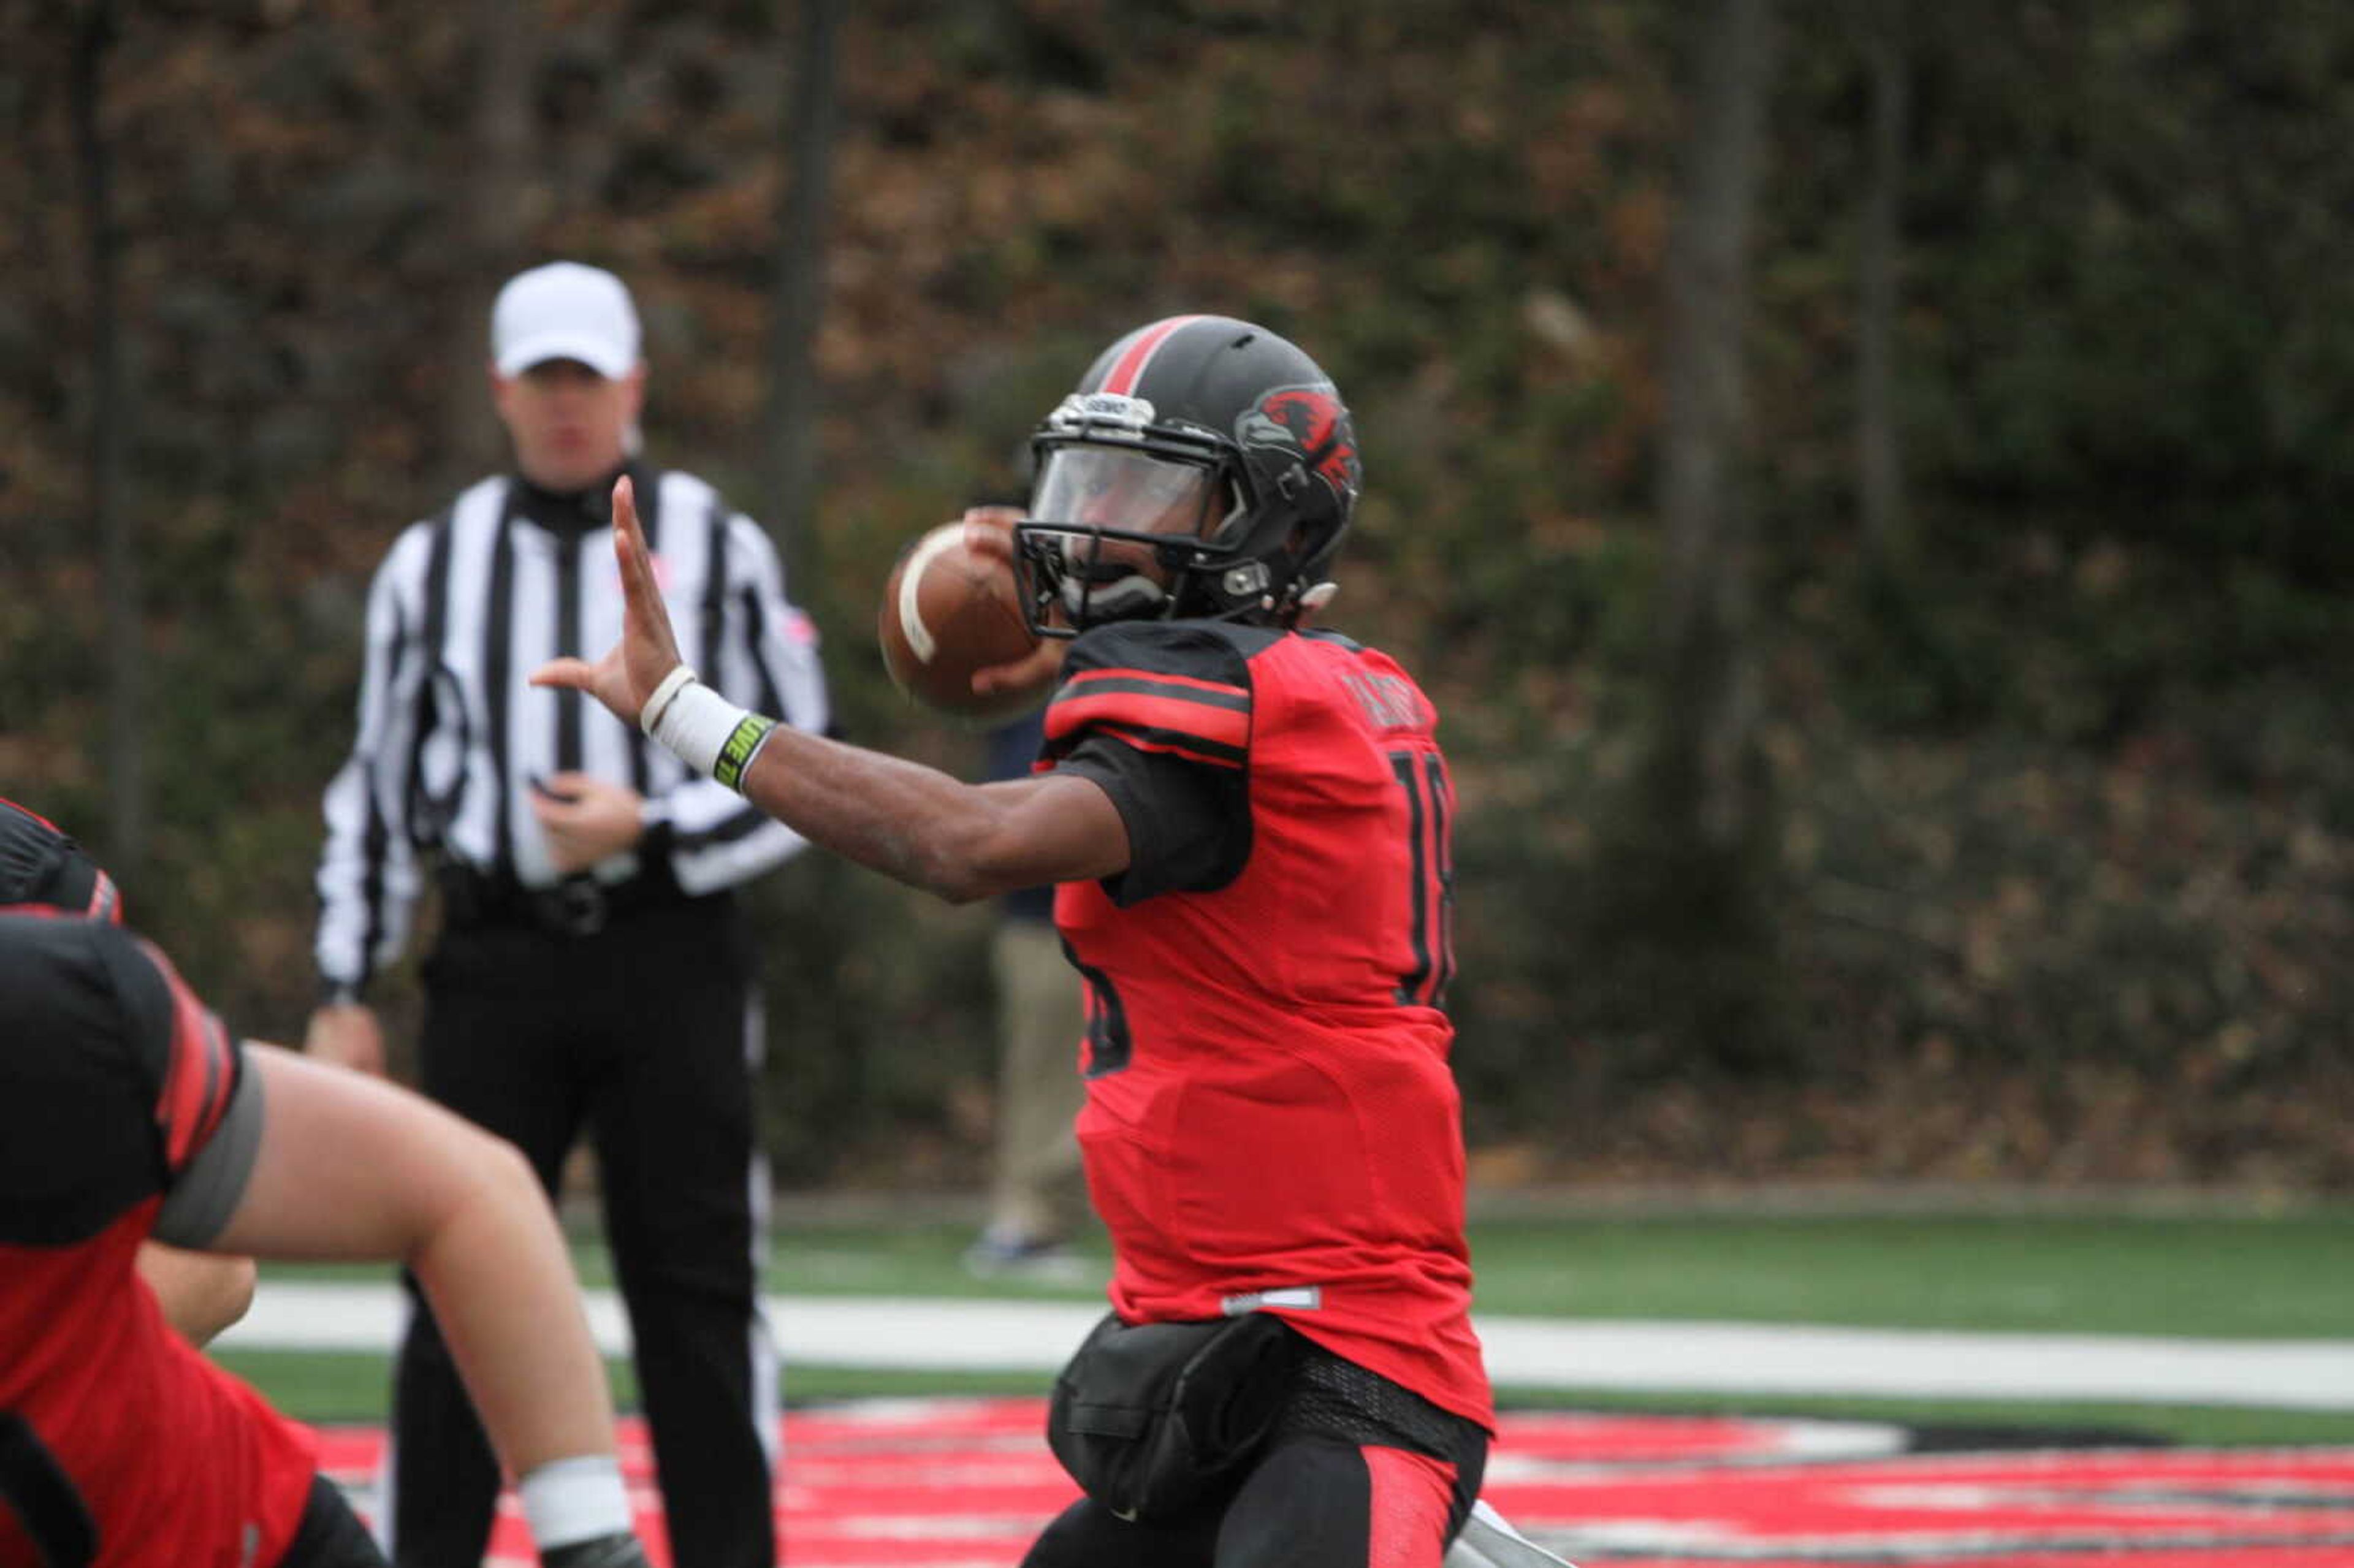 Freshman quarterback Dante Vandeven throws the football to one of his receivers in the Southeast Missouri State football team's final game of the season on Nov. 21 against UT Martin at Houck Stadium.